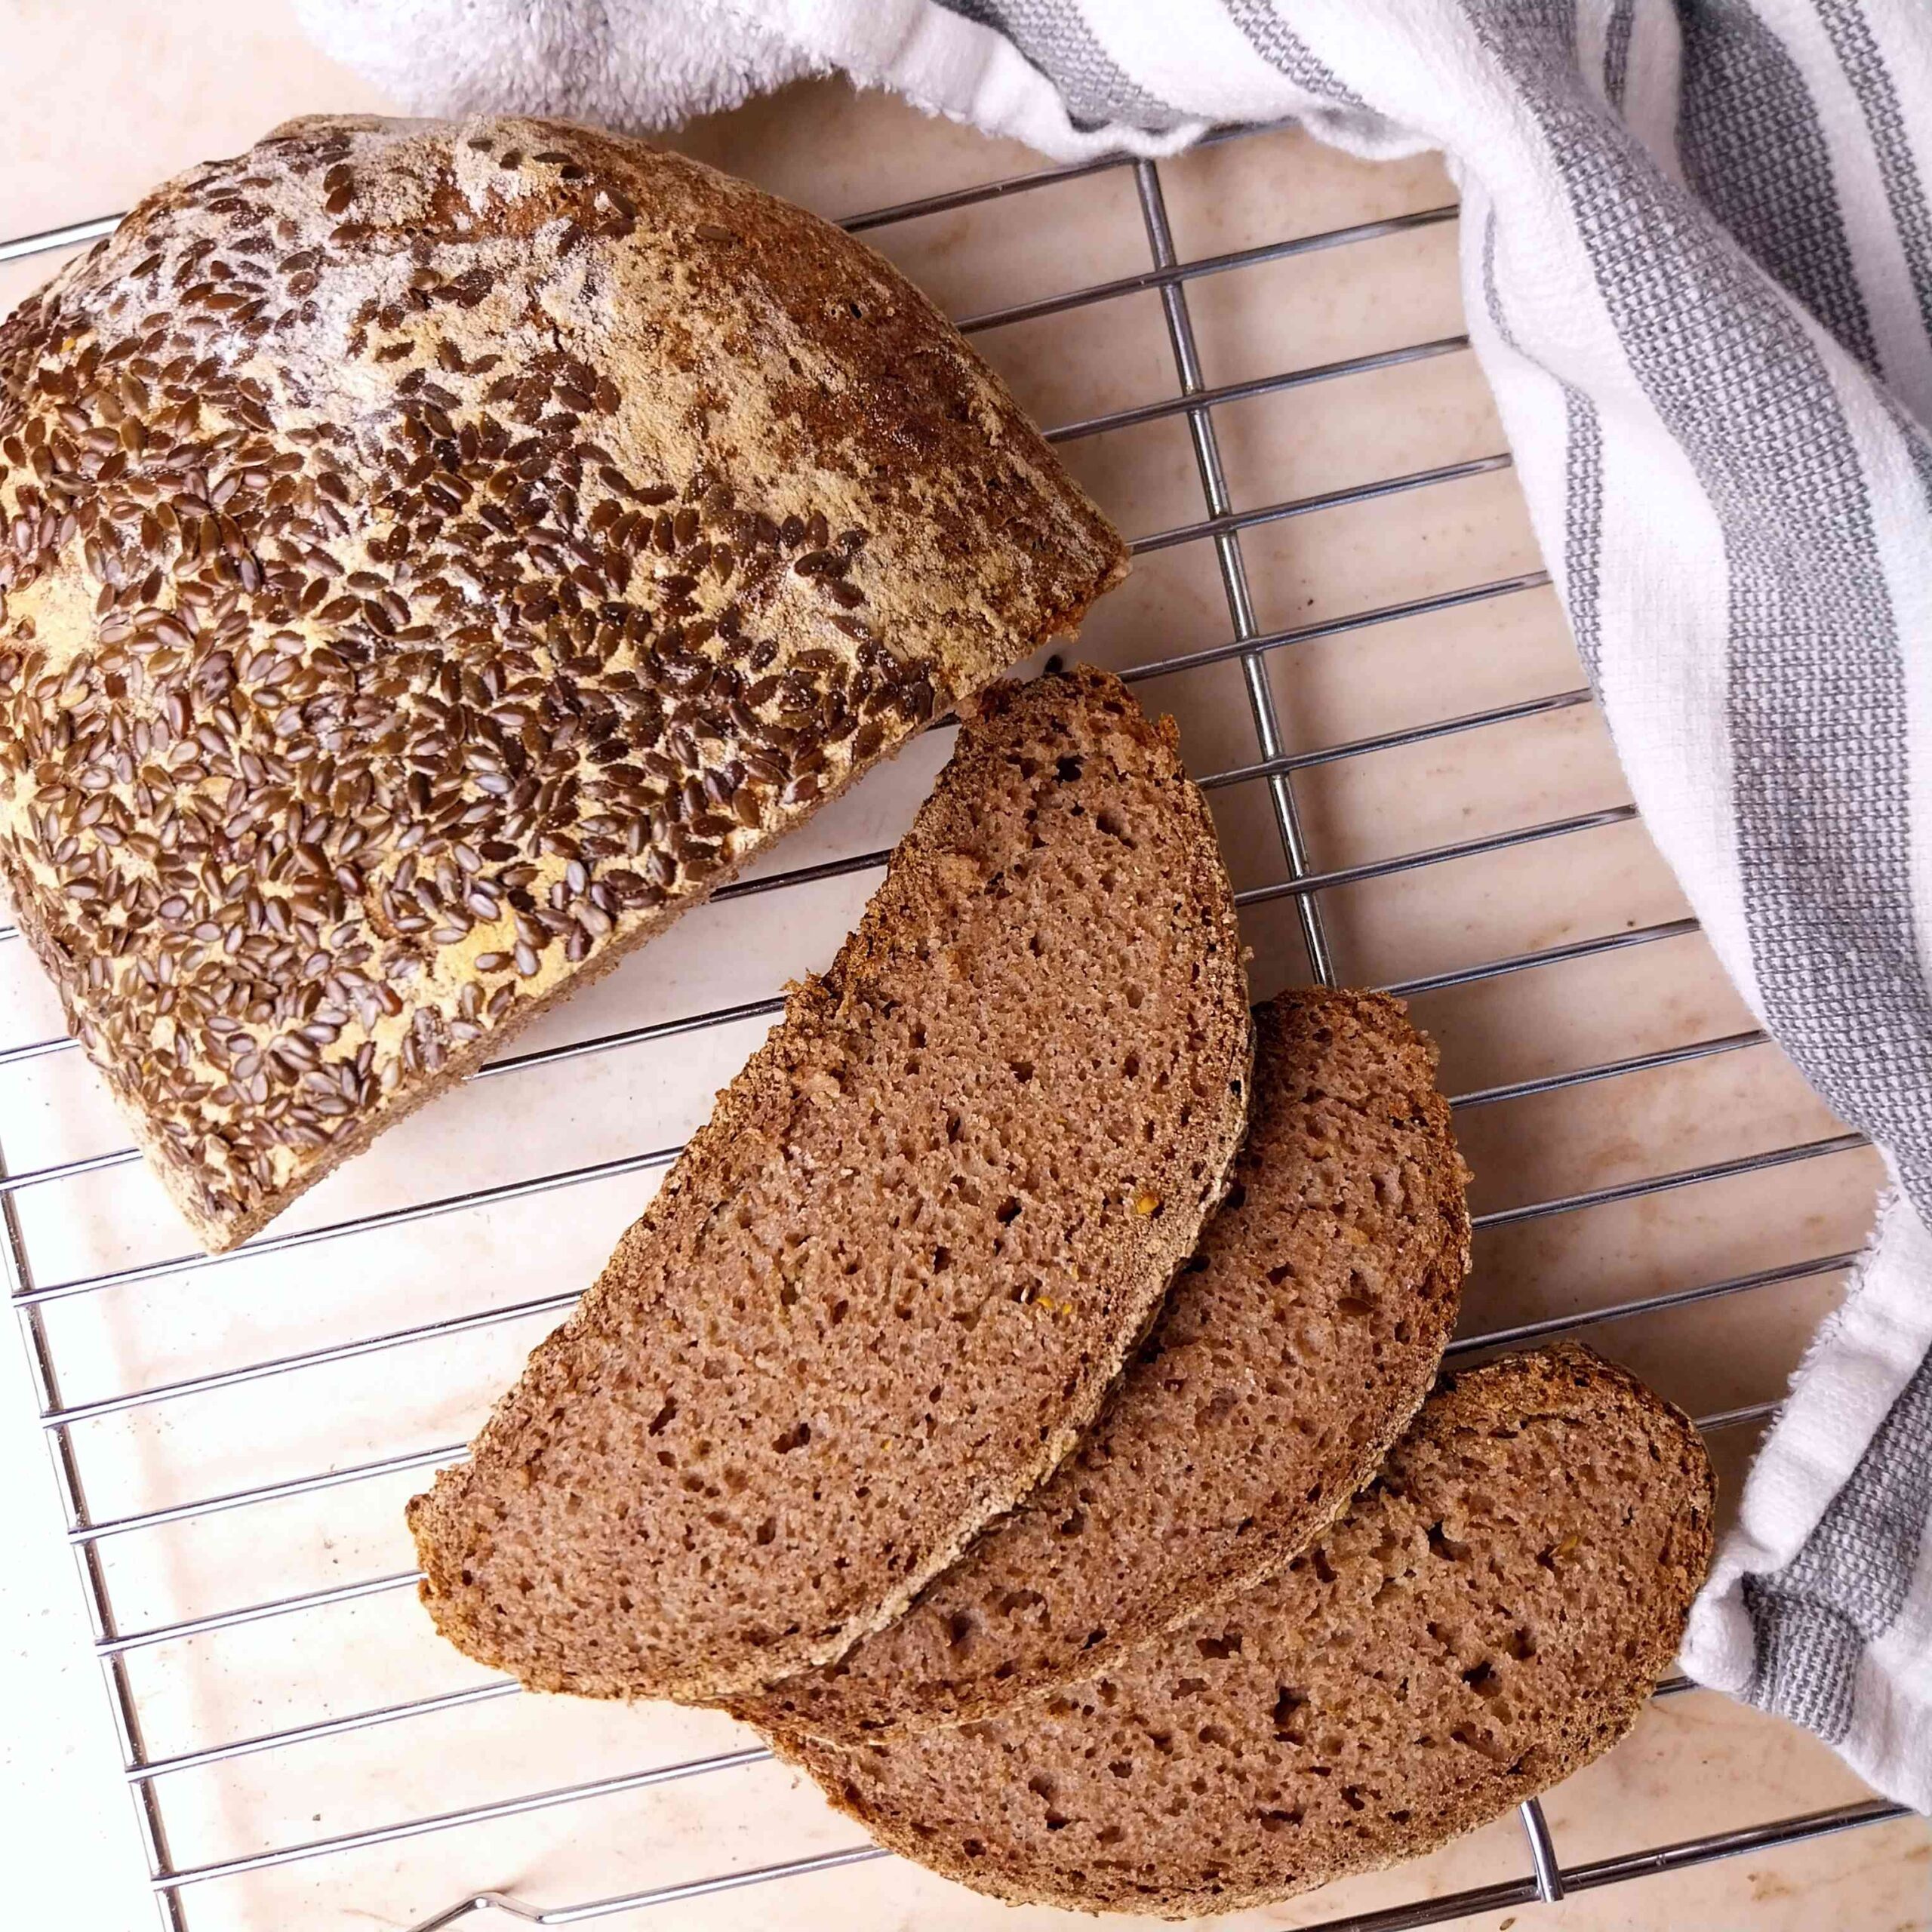 Sliced gluten-free teff bread on a cooling rack.